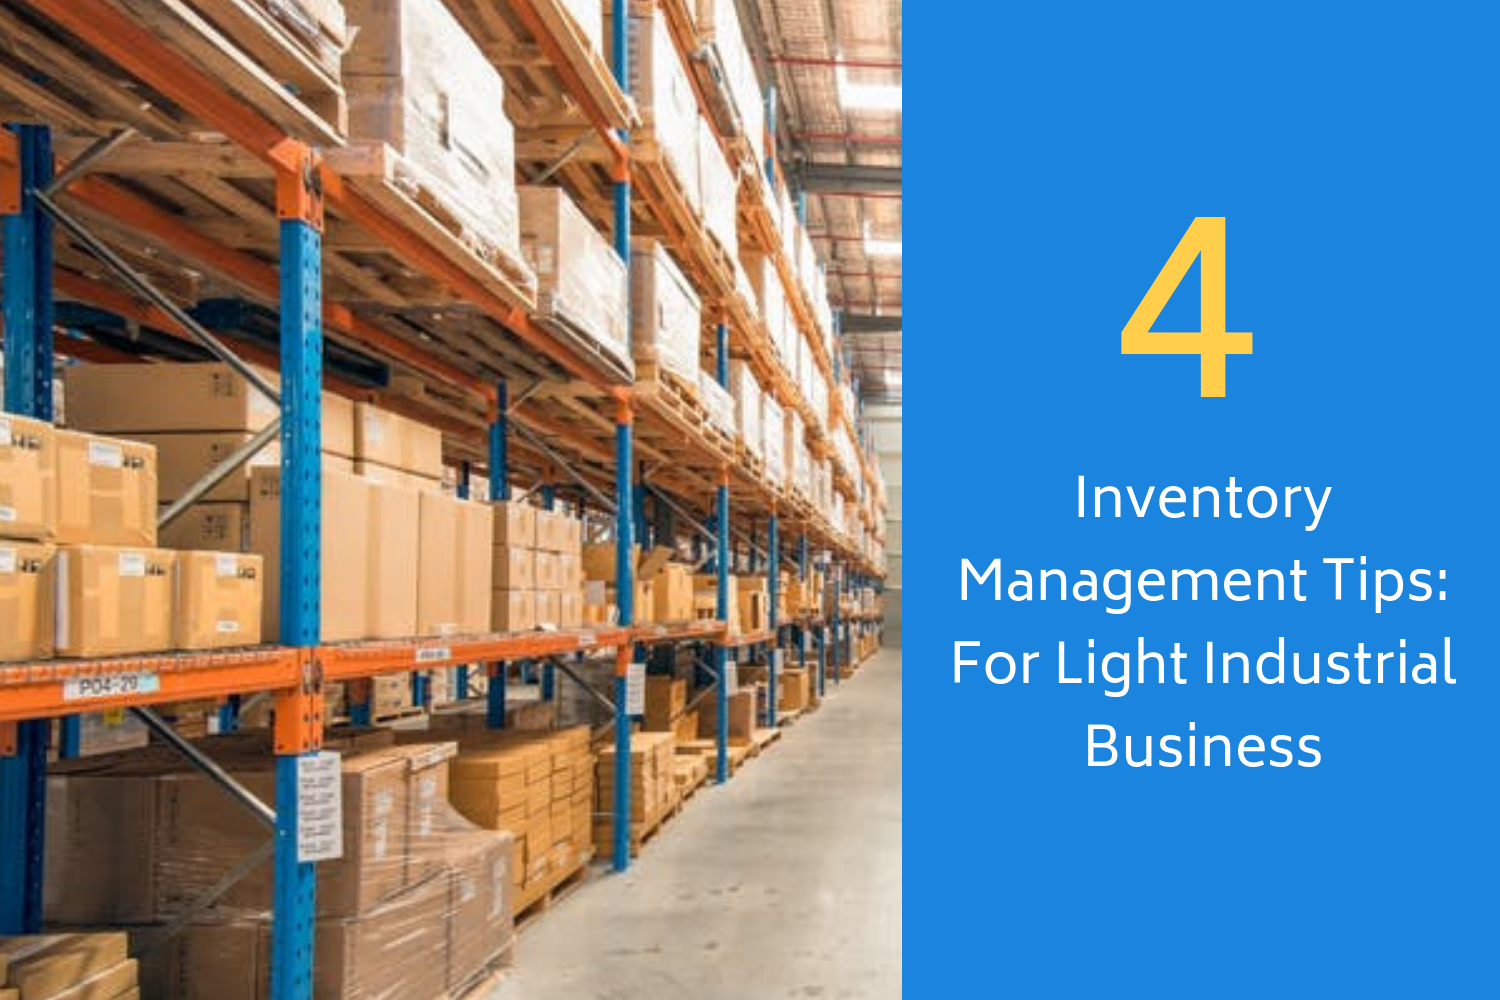 4 Inventory Management Tips